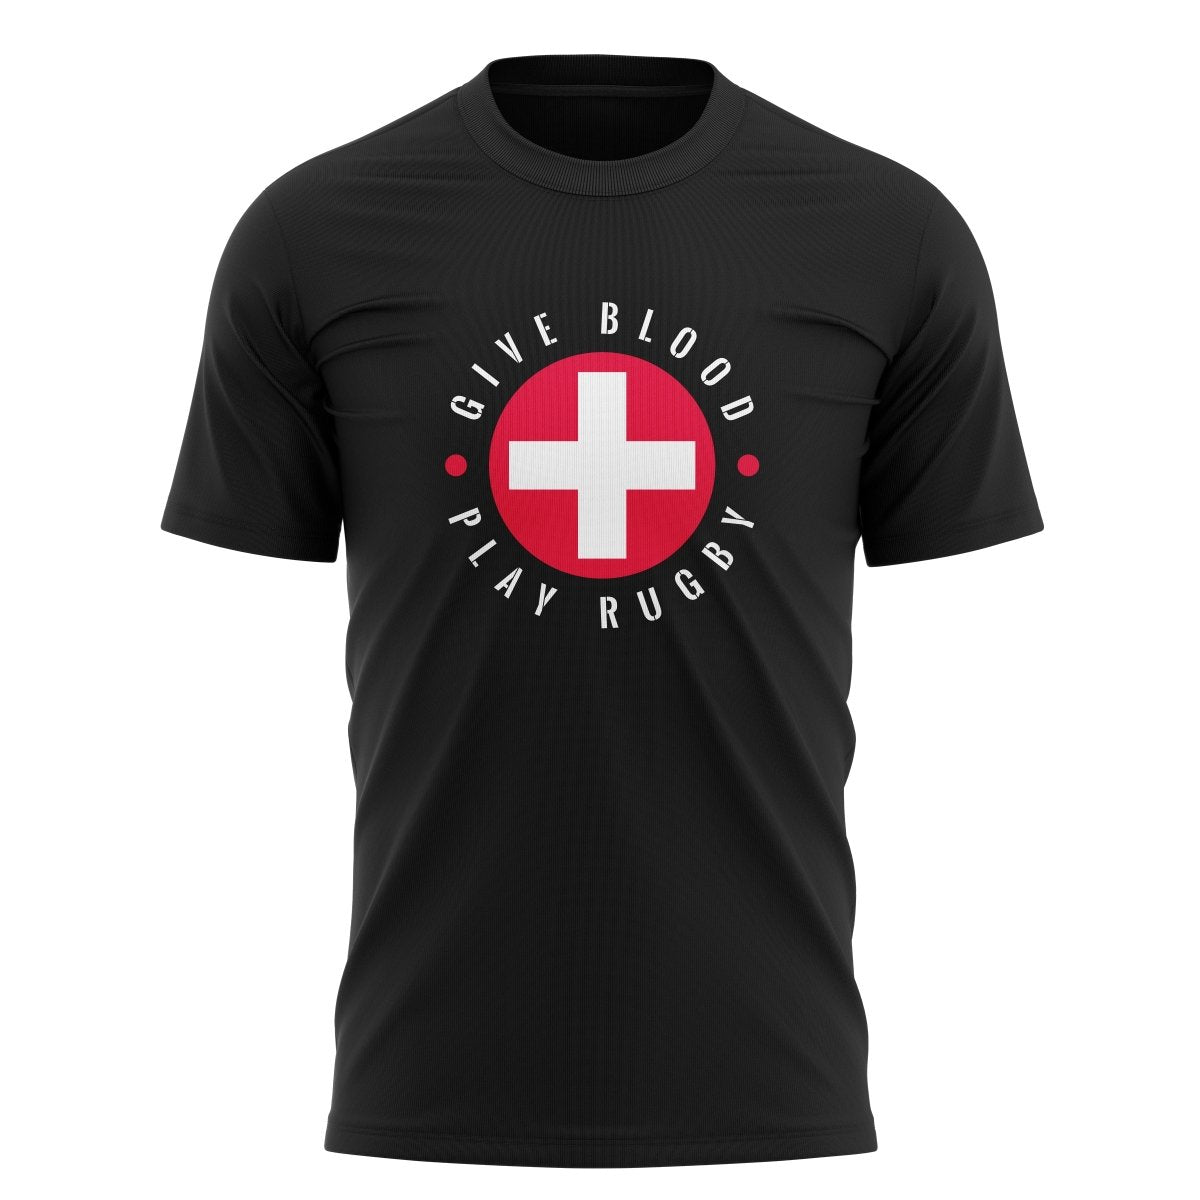 Give Blood PLAy Rugby Graphic Tee - www.therugbyshop.com www.therugbyshop.com MEN'S / BLACK / S XIX Brands TEES Give Blood PLAy Rugby Graphic Tee